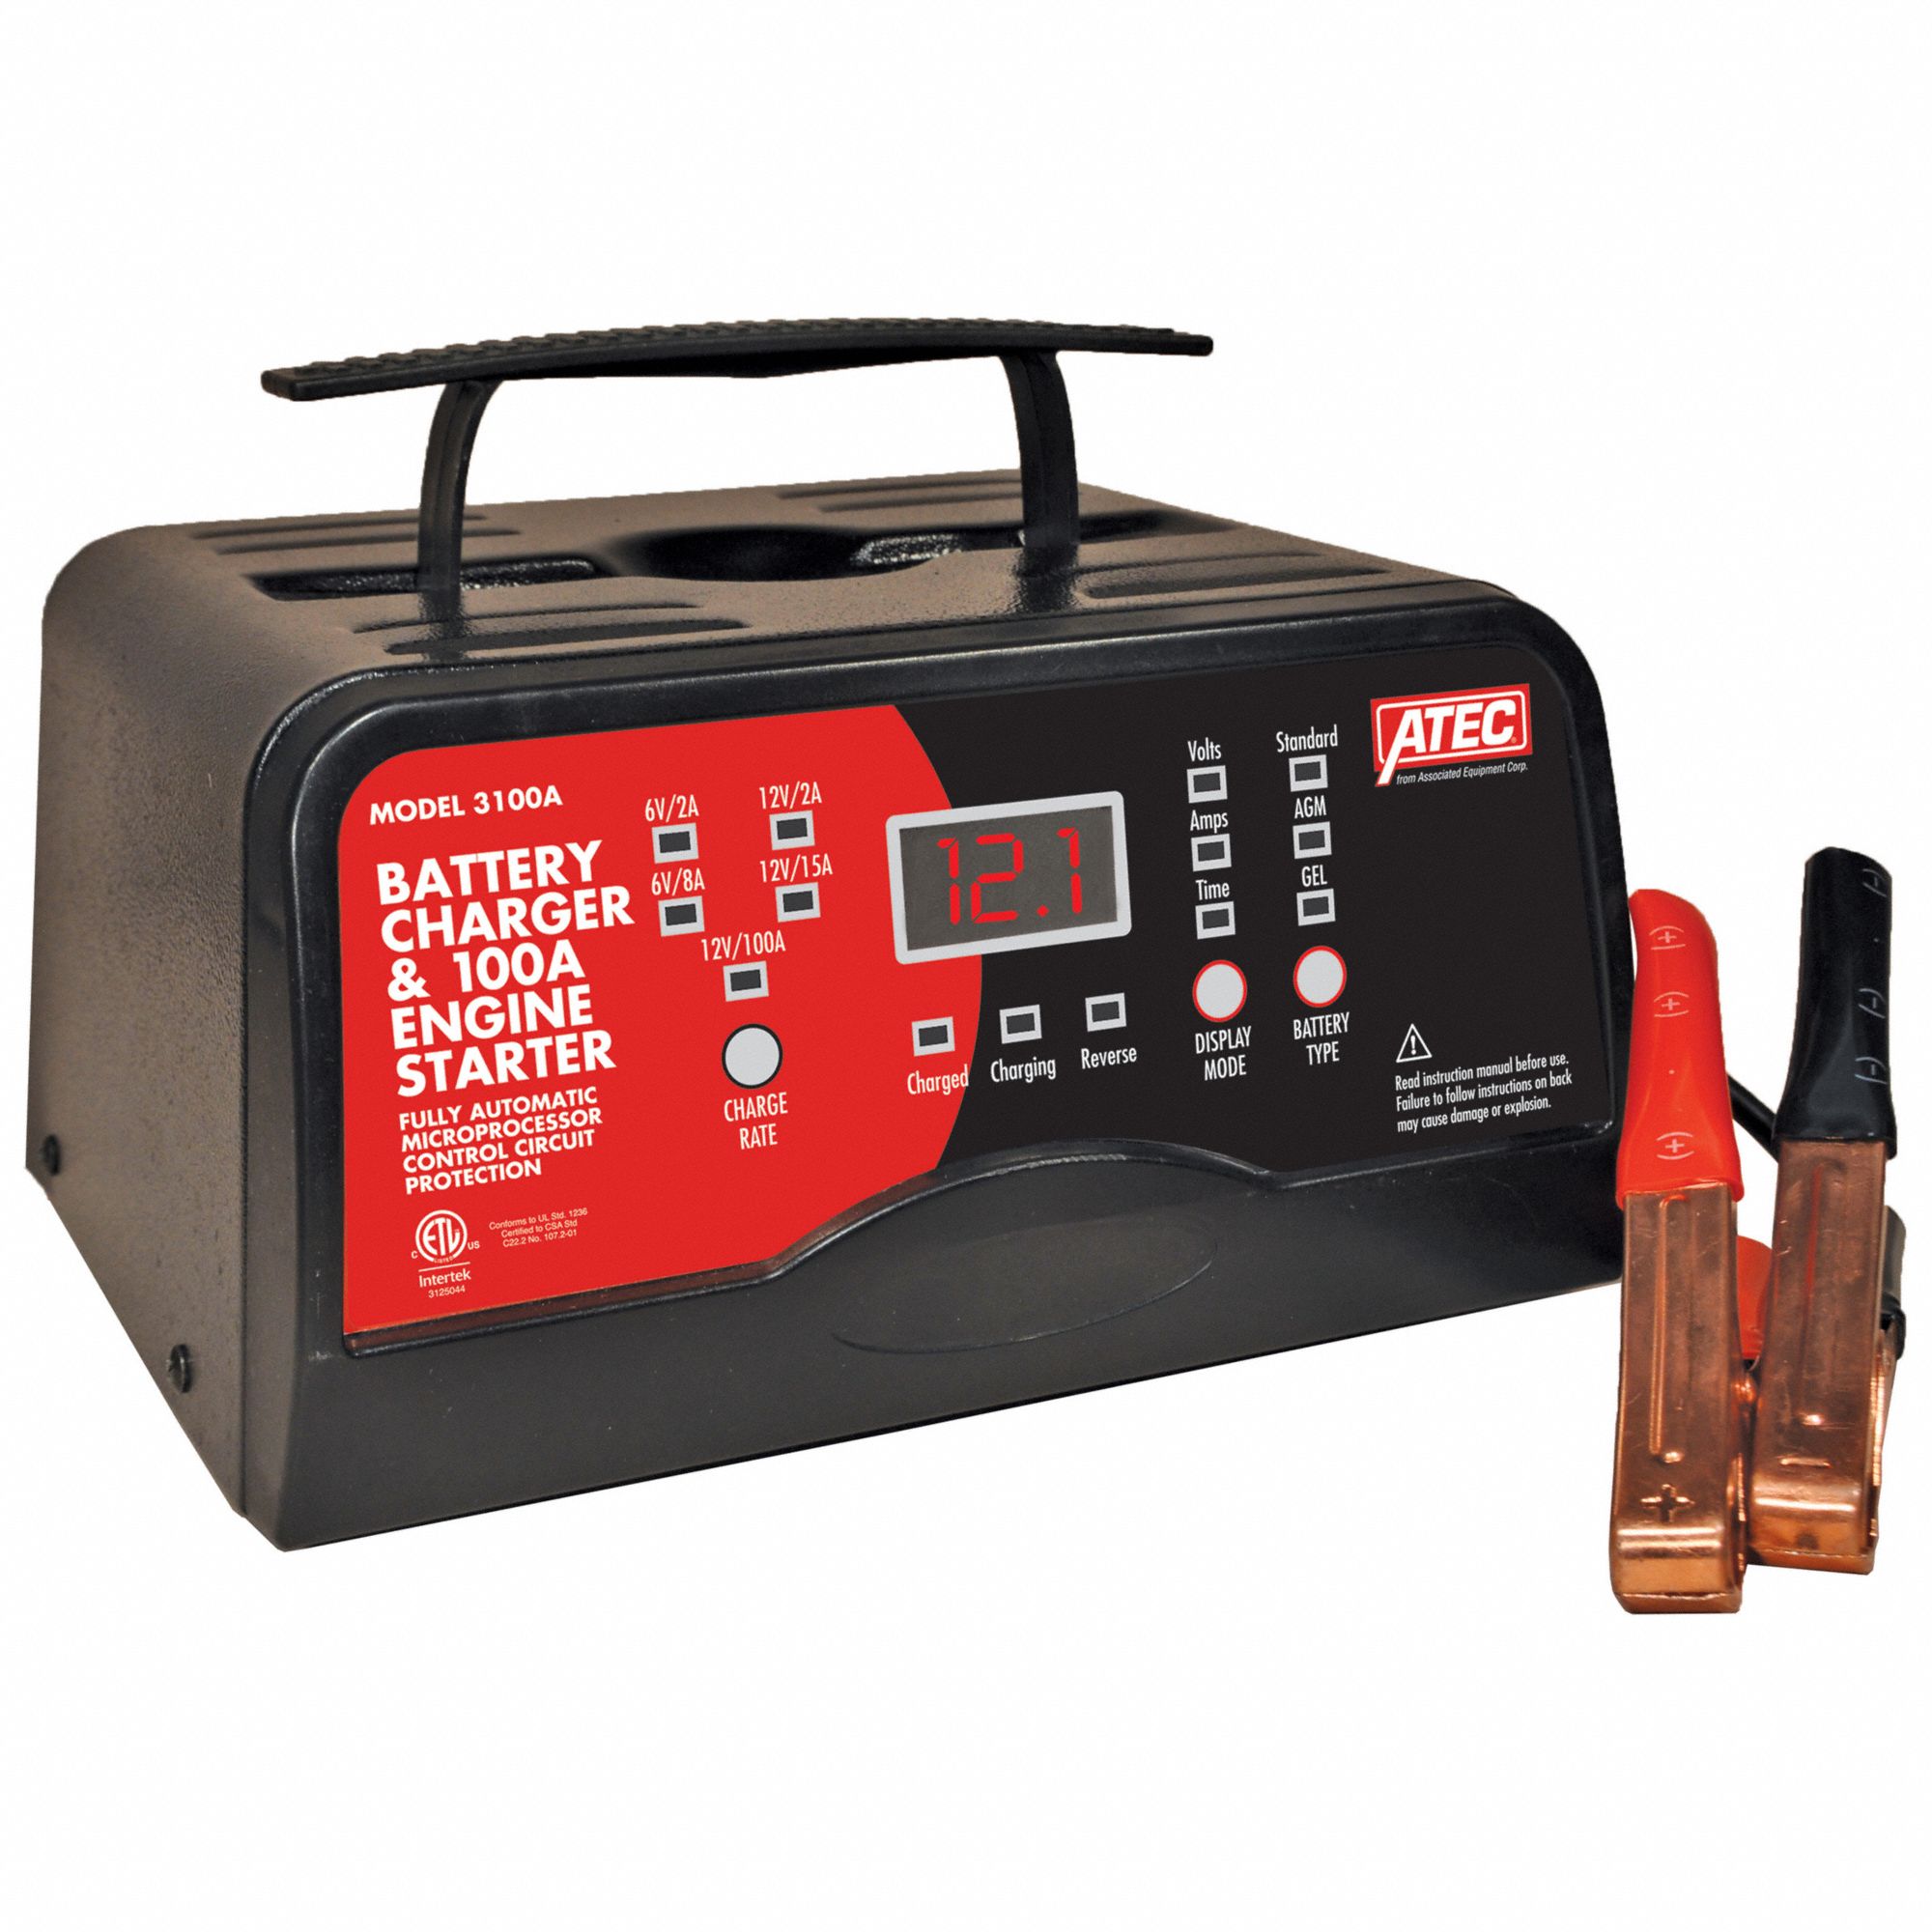 Battery Charger: Charging, Auto, For AGM/Gel/Wet Cell, Smart, 6.5 ft Cable Lg, Benchtop Charger